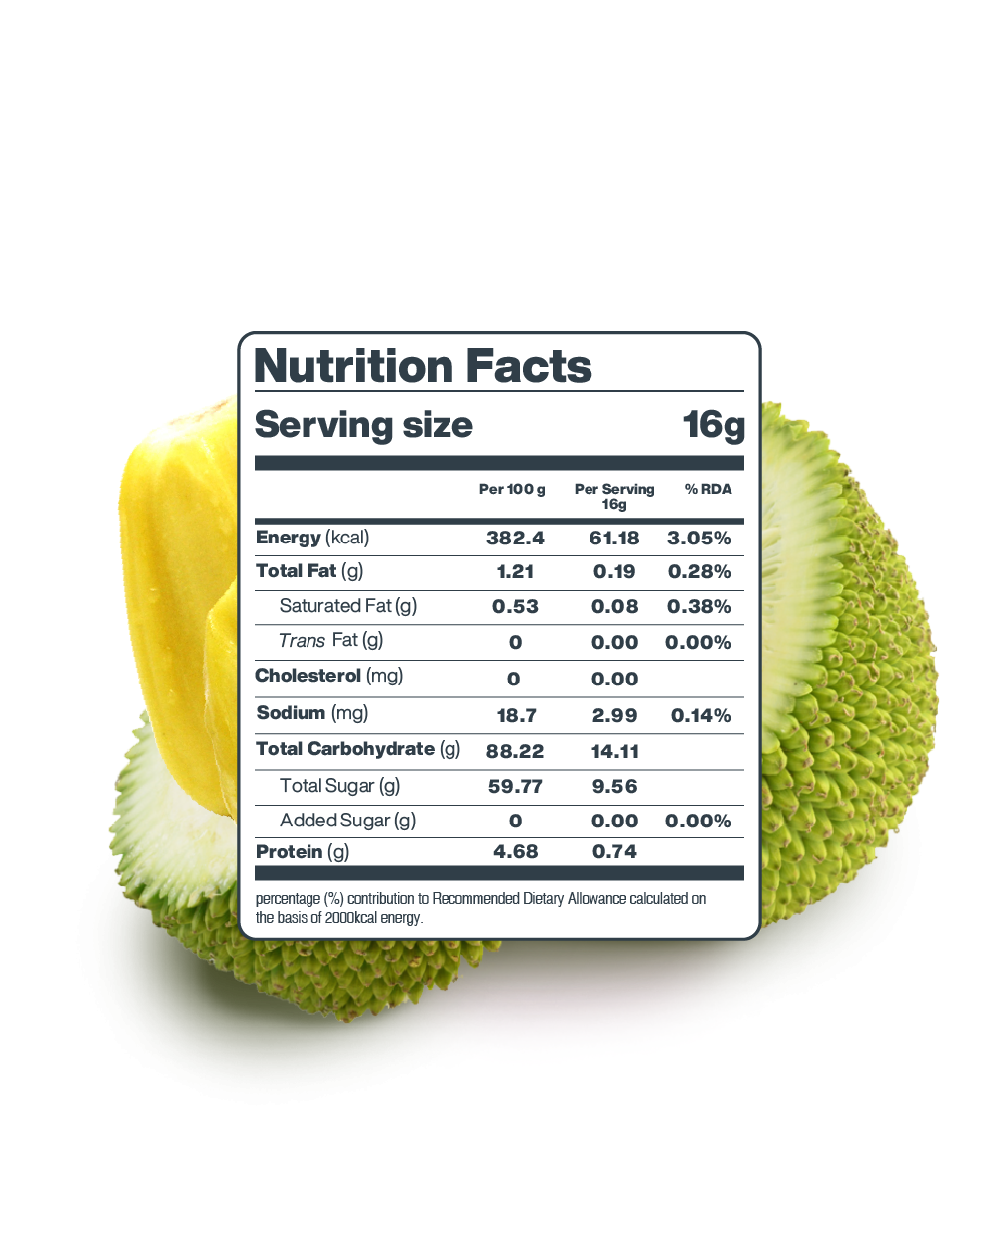 A nutrition label for Themoonstoreindia freeze-dried Moon Jackfruit chips, highlighting the vitamin C content and health benefits.